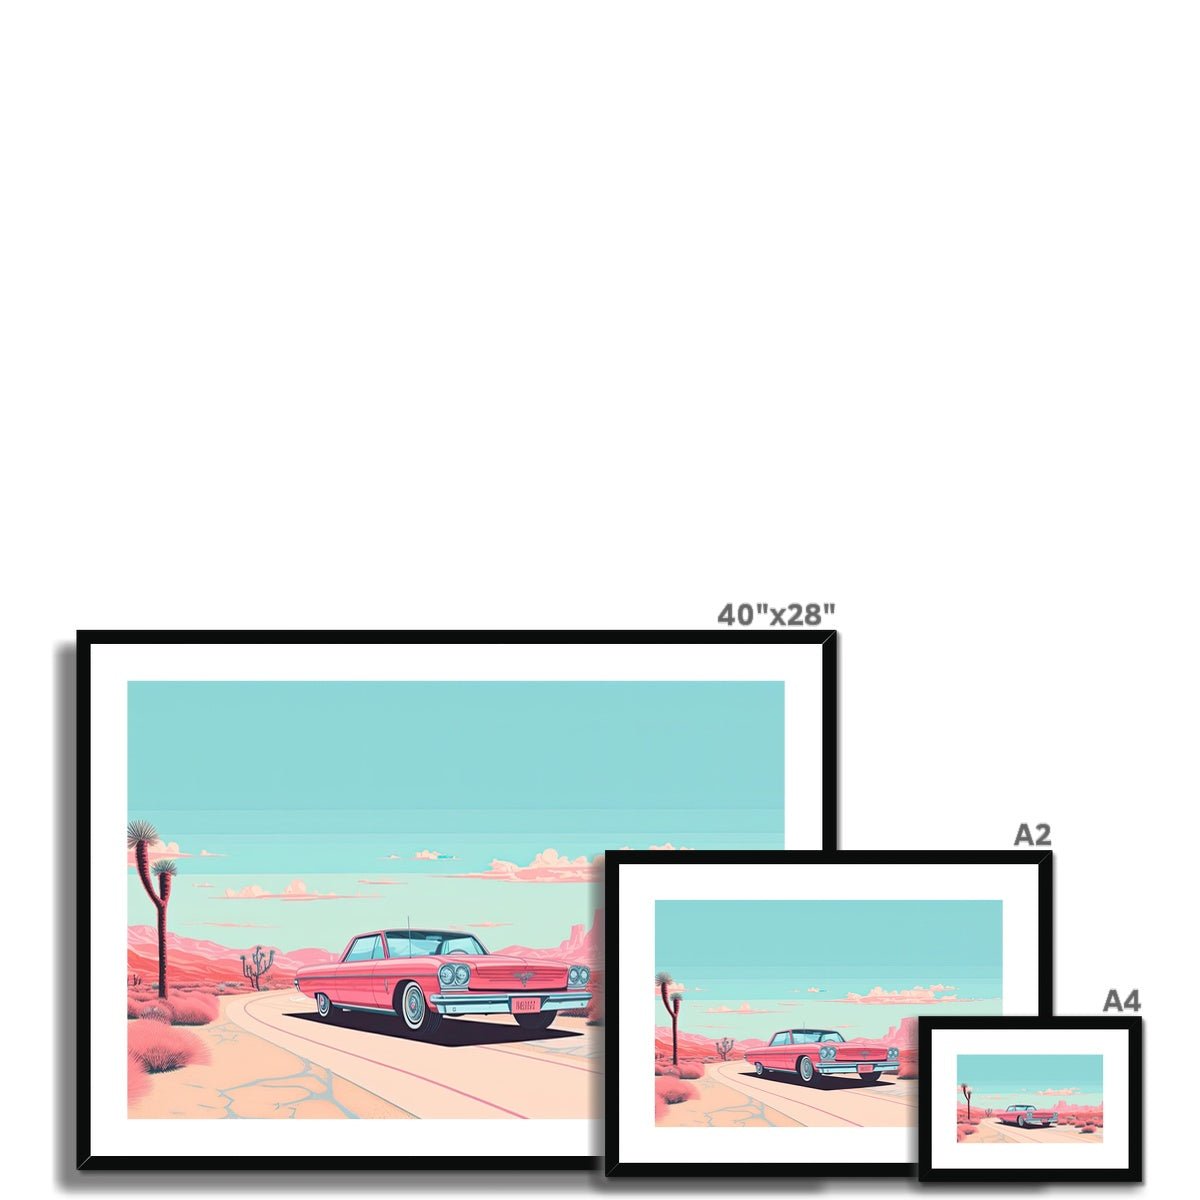 Pink Cadillac Framed & Mounted Print - Pixel Gallery